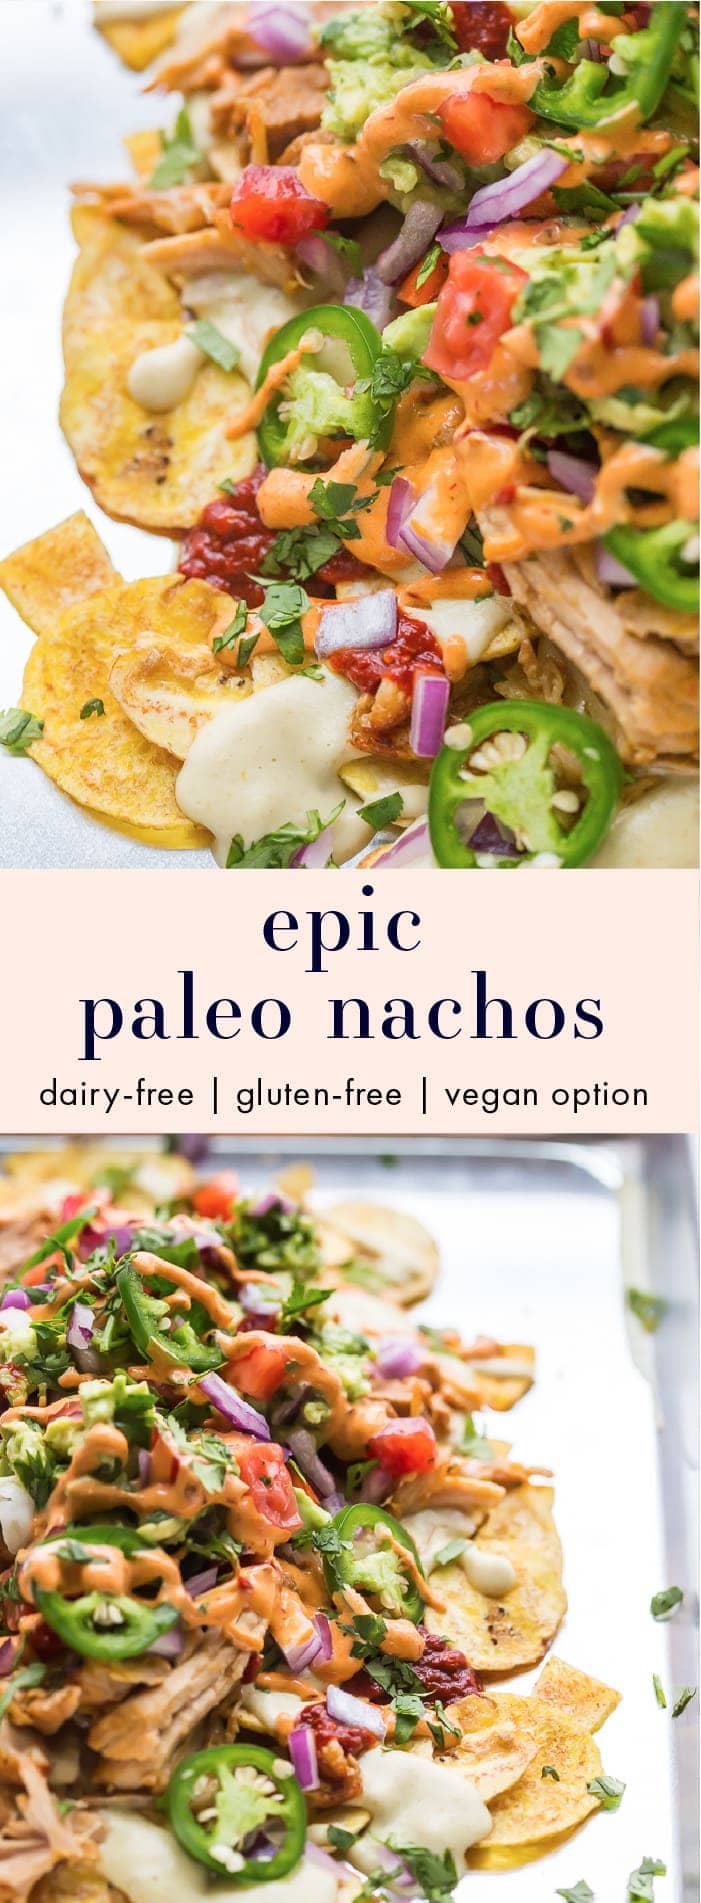 These paleo nachos are epic, aka the best paleo nachos ever. What makes paleo nachos epic, you ask? Well, what do you think of plantain chips topped with tender carnitas, the best paleo queso blanco, guacamole, pico de gallo, smoky guajillo salsa, and creamy chipotle sauce? If those doesn't sound like the best paleo nachos to you, I just don't even know who you are anymore. To make these vegan, simply tofu or your favorite meatless protein for the carnitas.